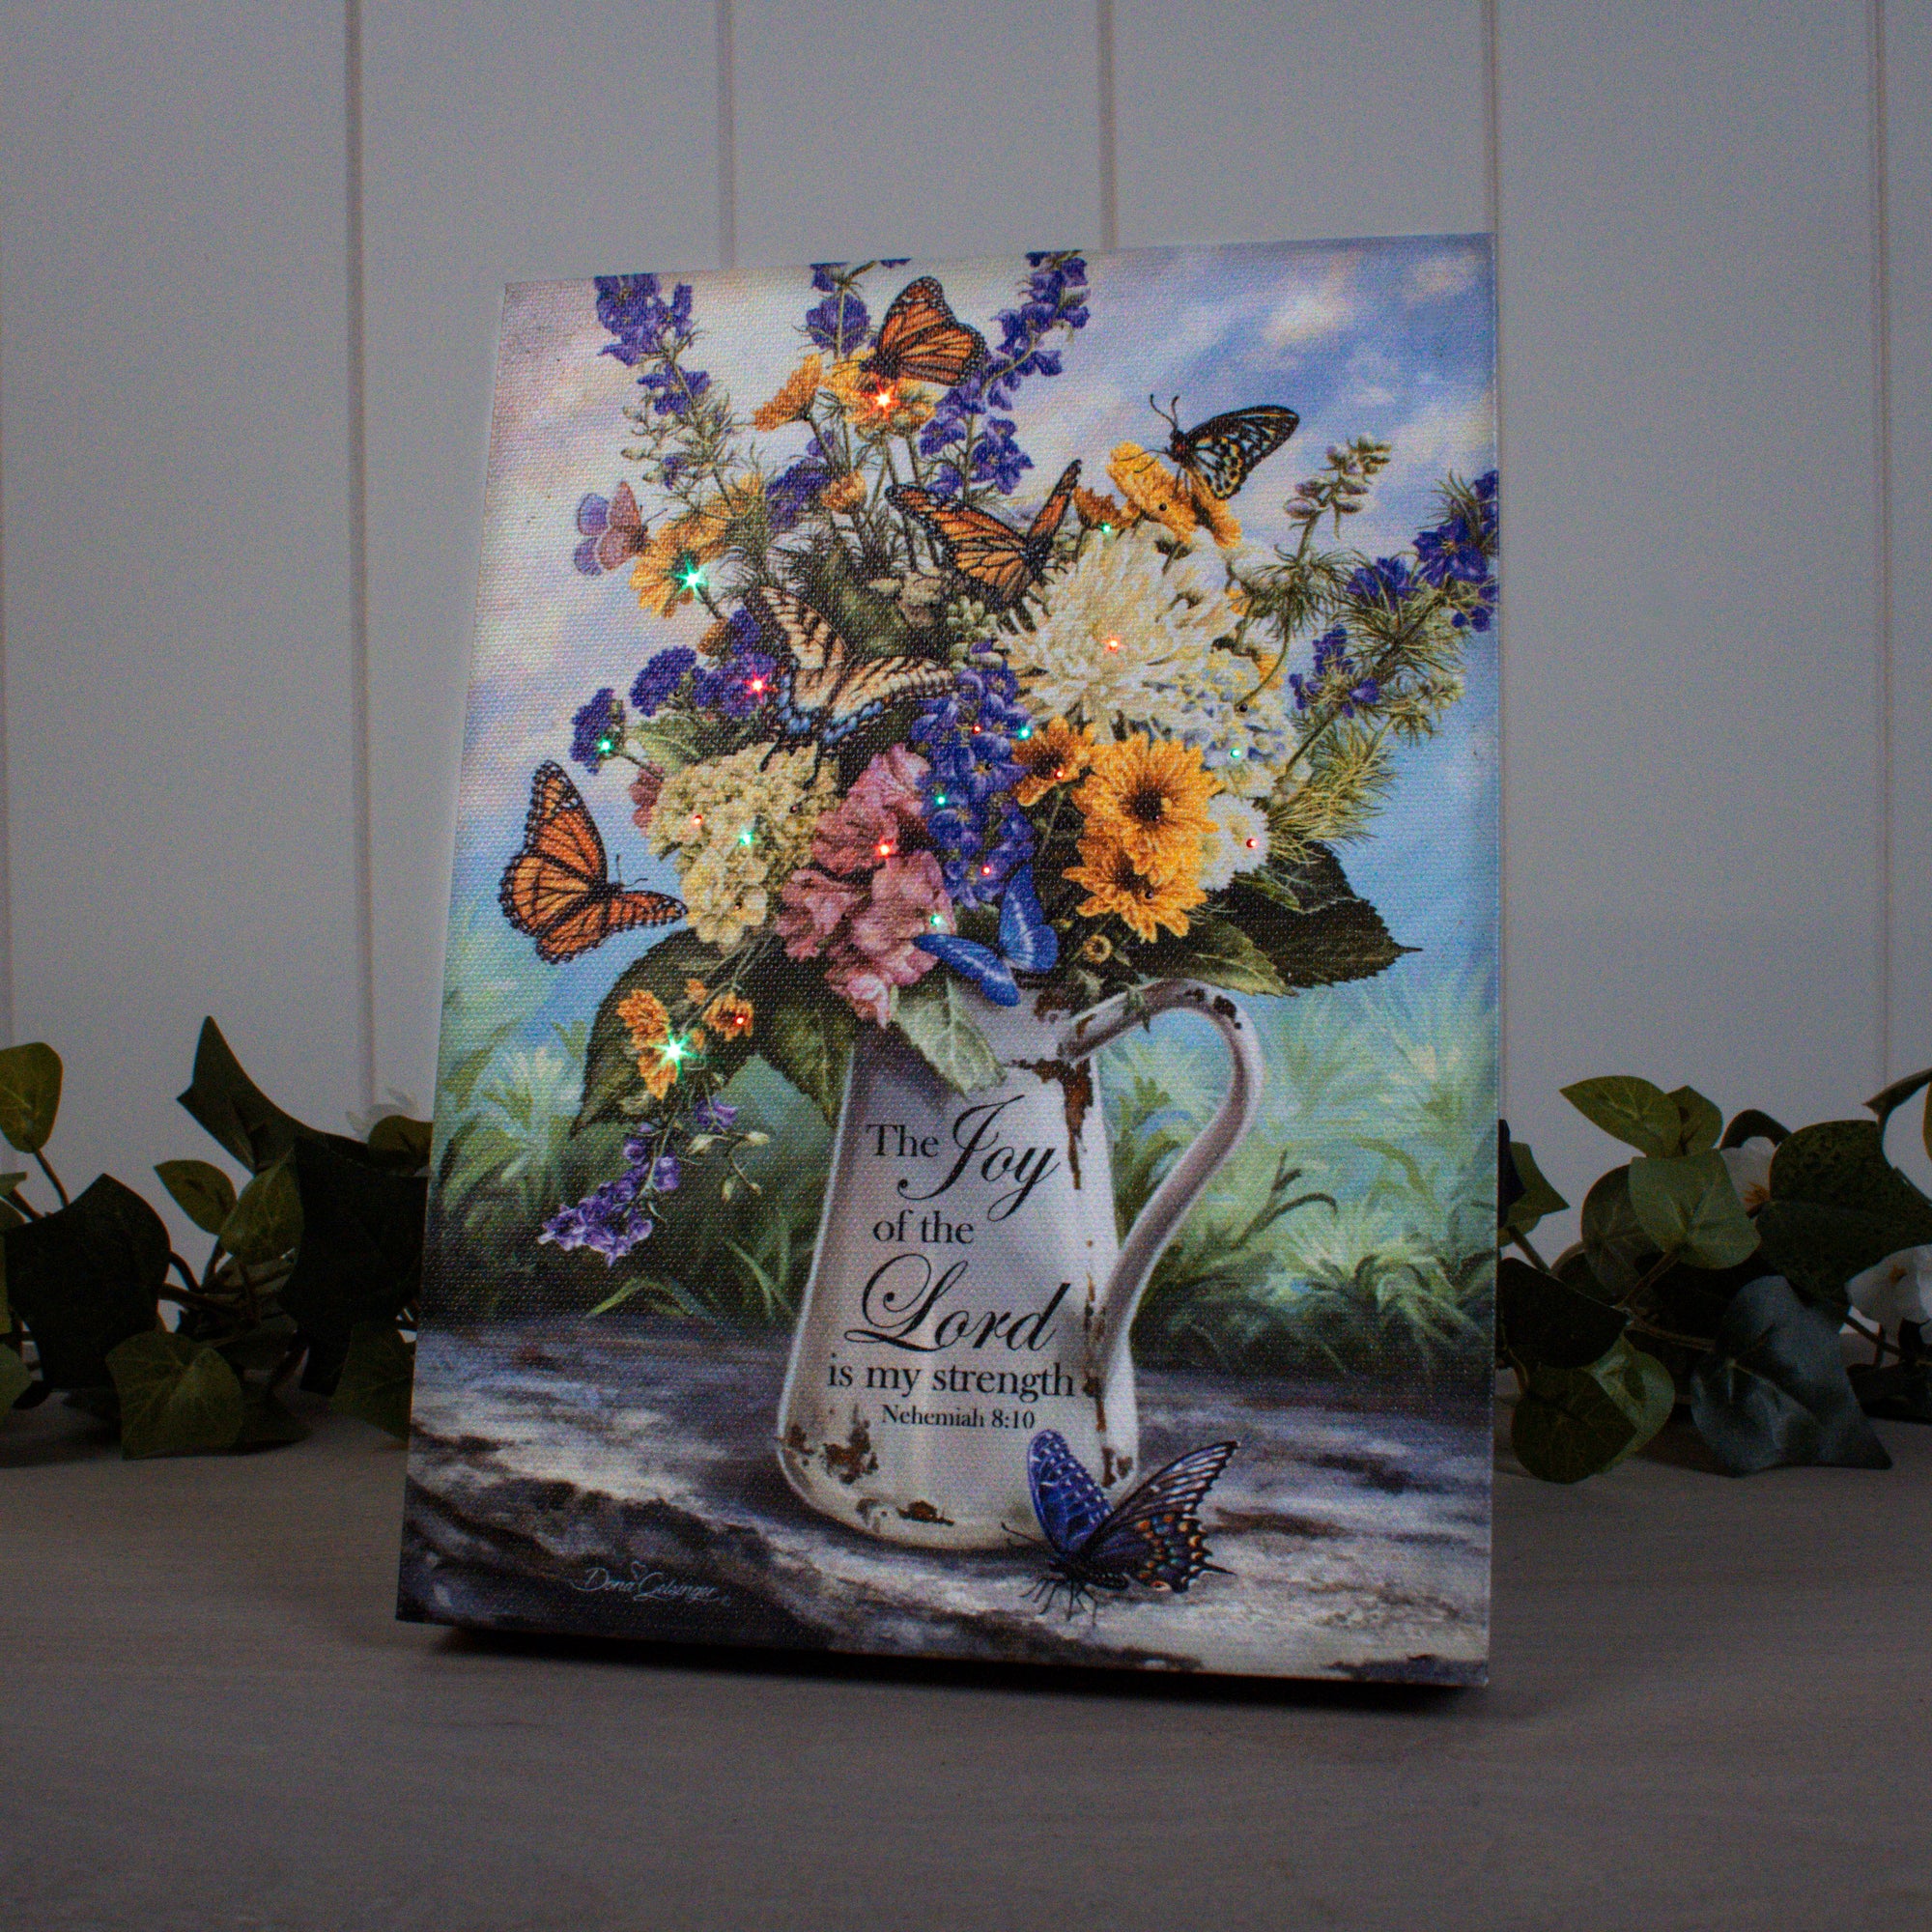 Joy of the Lord 8x6 Lighted Tabletop Canvas